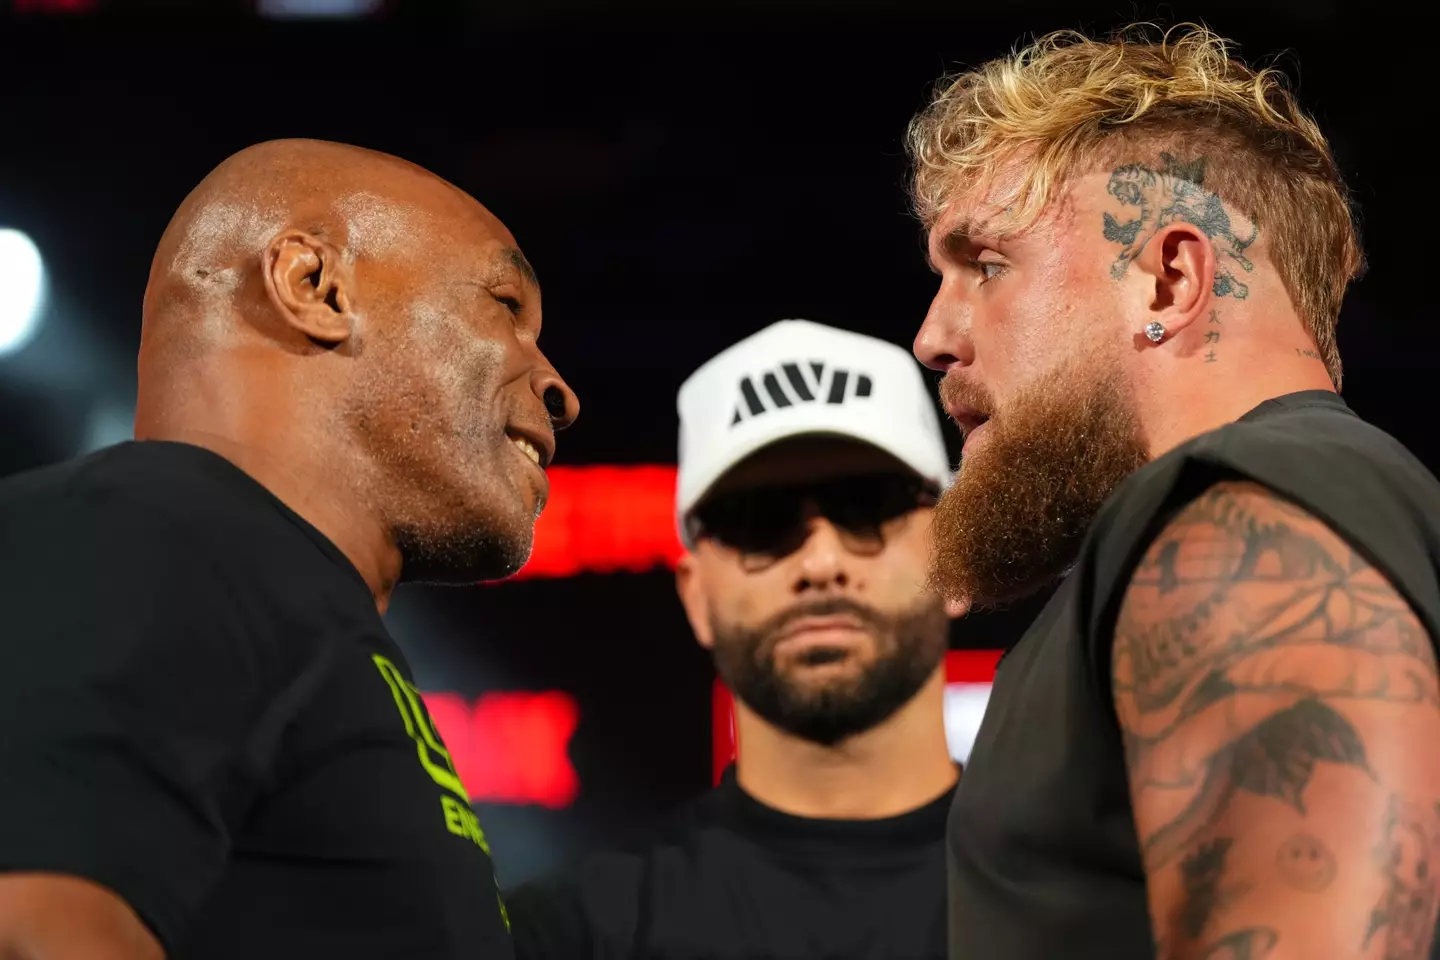 Mike Tyson and Jake Paul face off ahead of their fight on July 20. Image: Getty